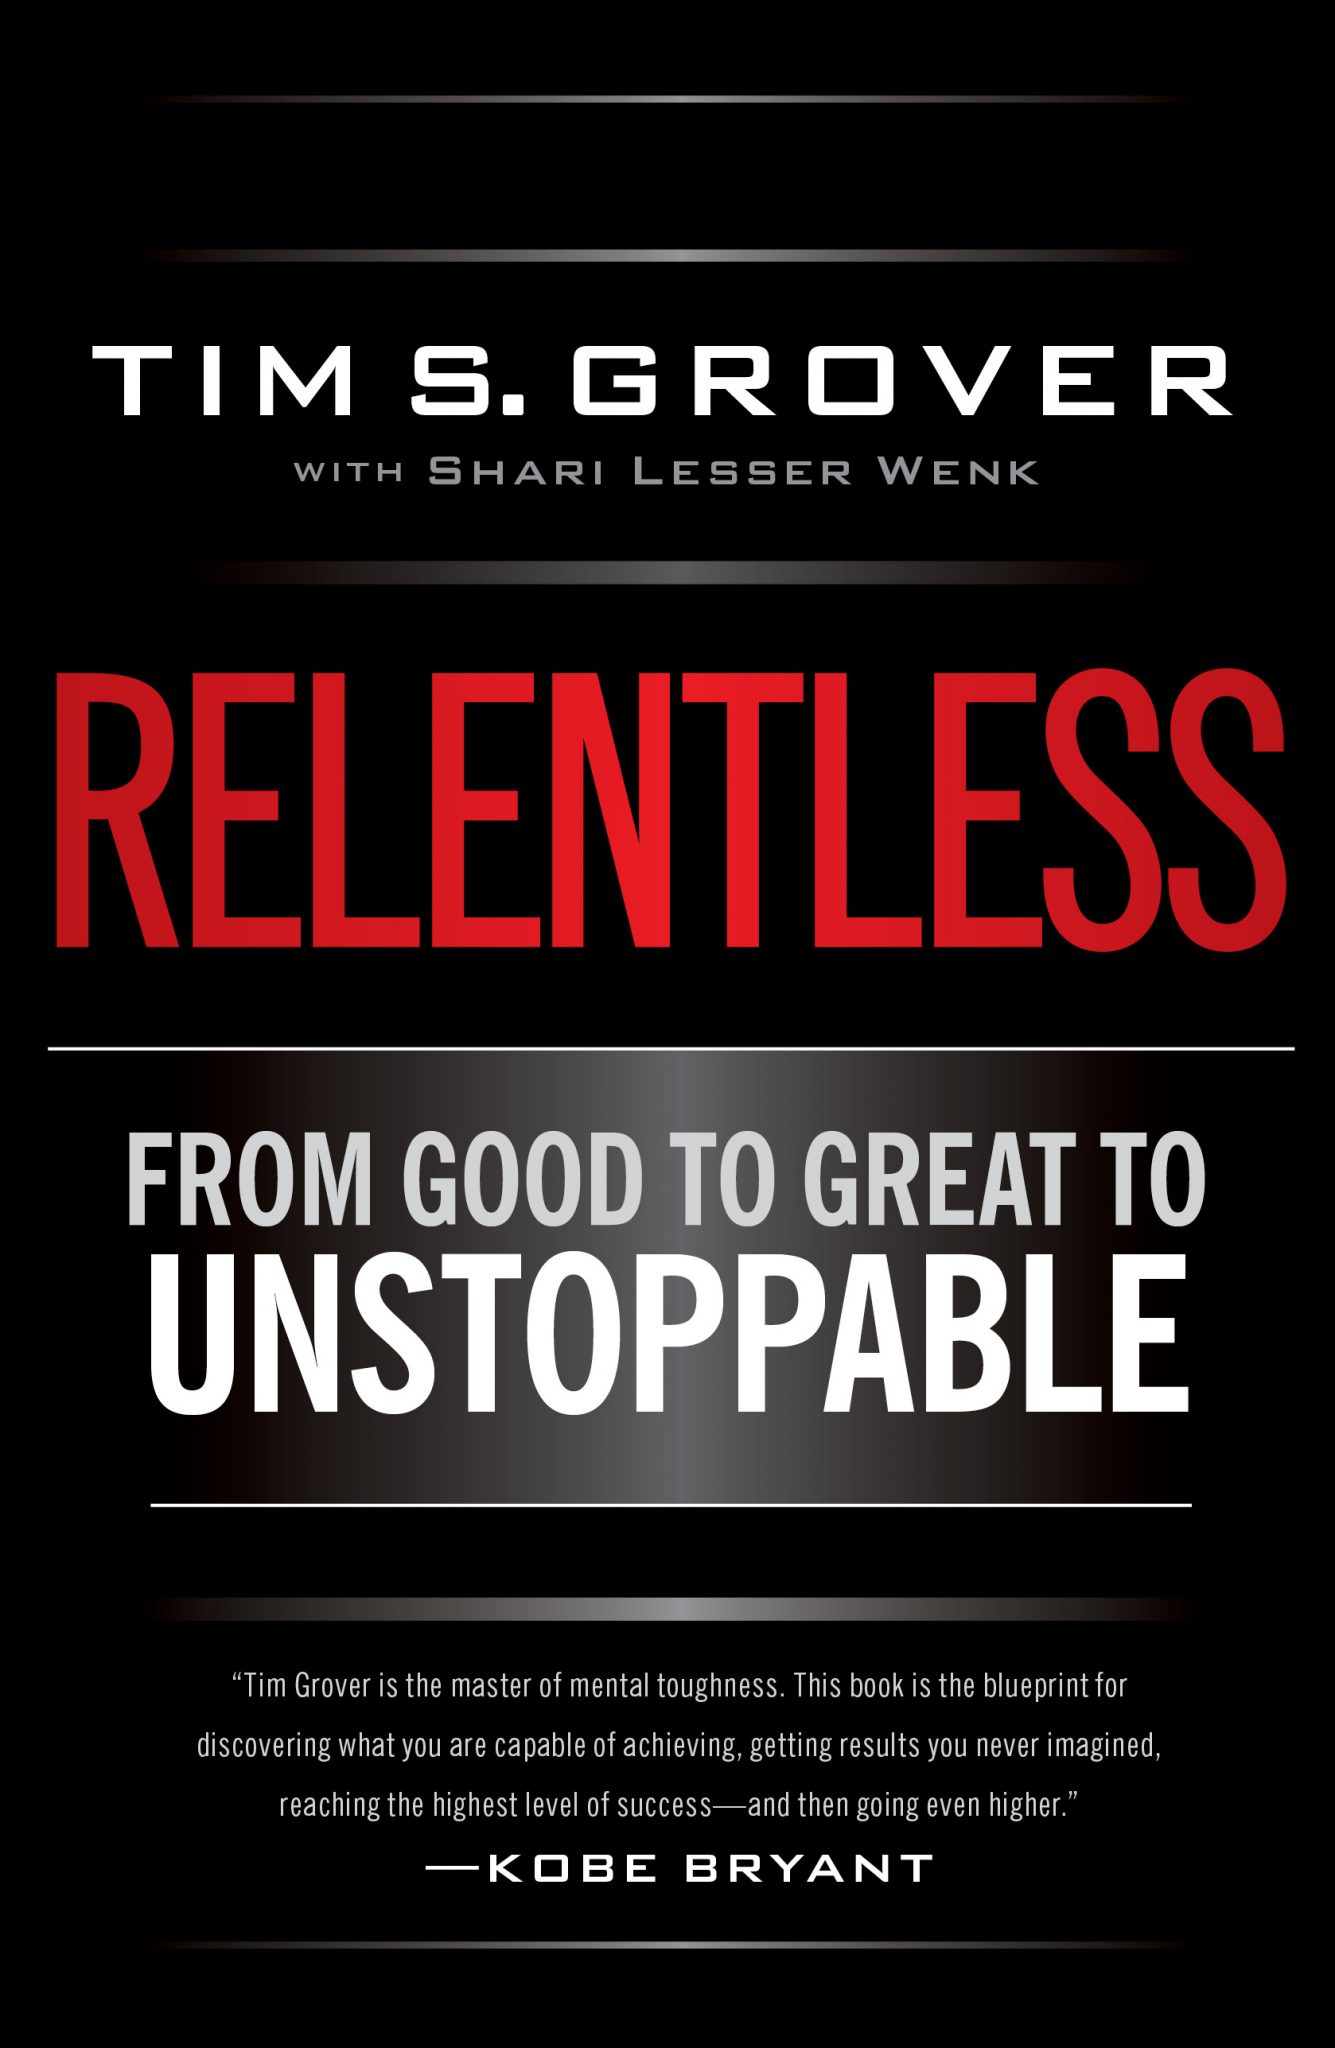 “Relentless”, from Good to Great to Unstoppable, Book Summary, by Miguel De La Fuente, https://www.turbomind.com/